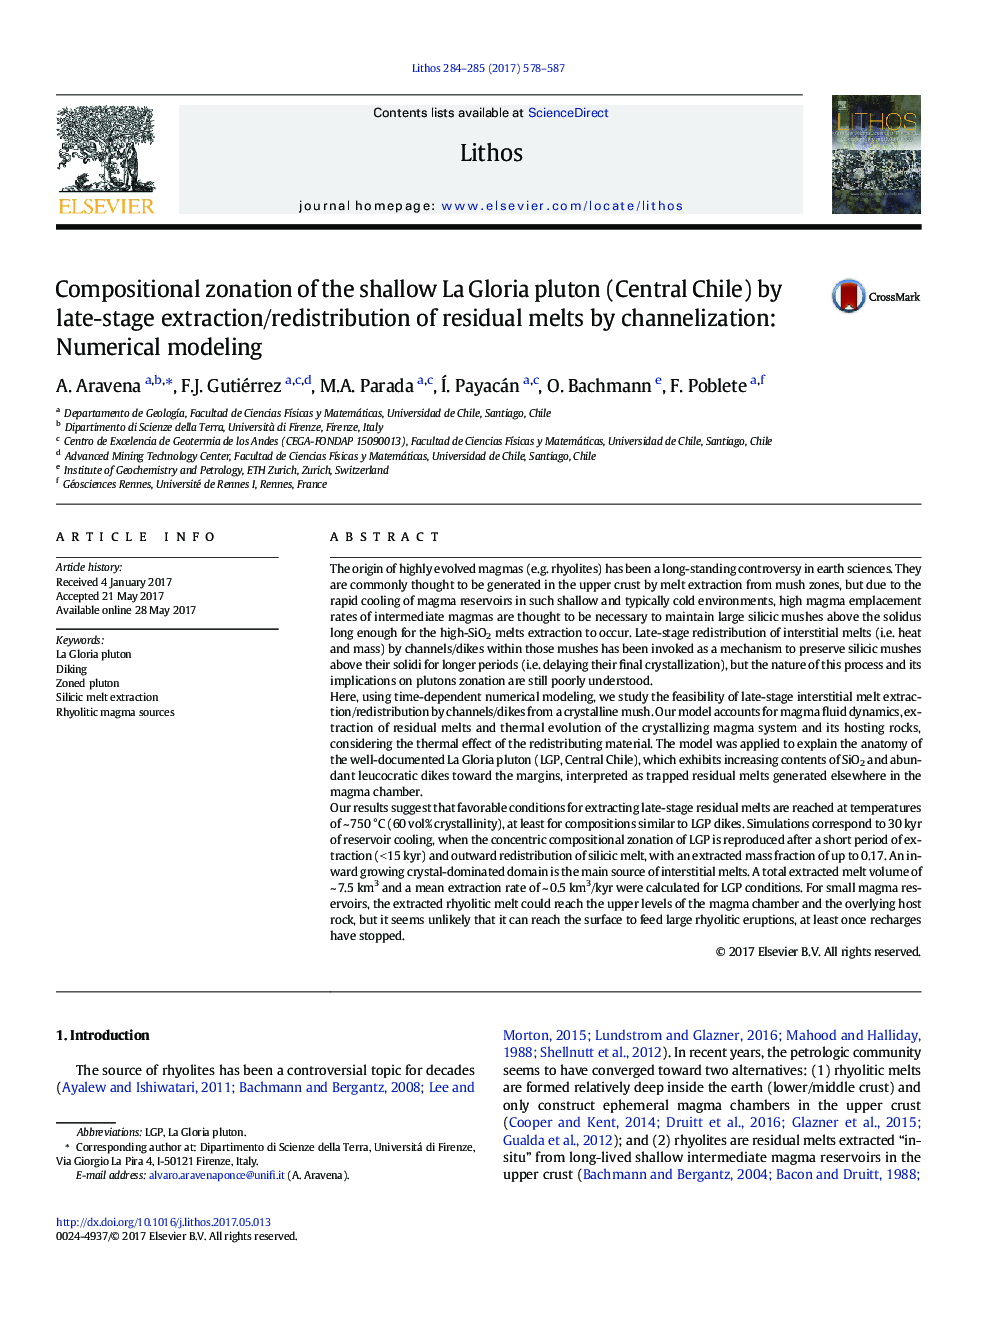 Compositional zonation of the shallow La Gloria pluton (Central Chile) by late-stage extraction/redistribution of residual melts by channelization: Numerical modeling